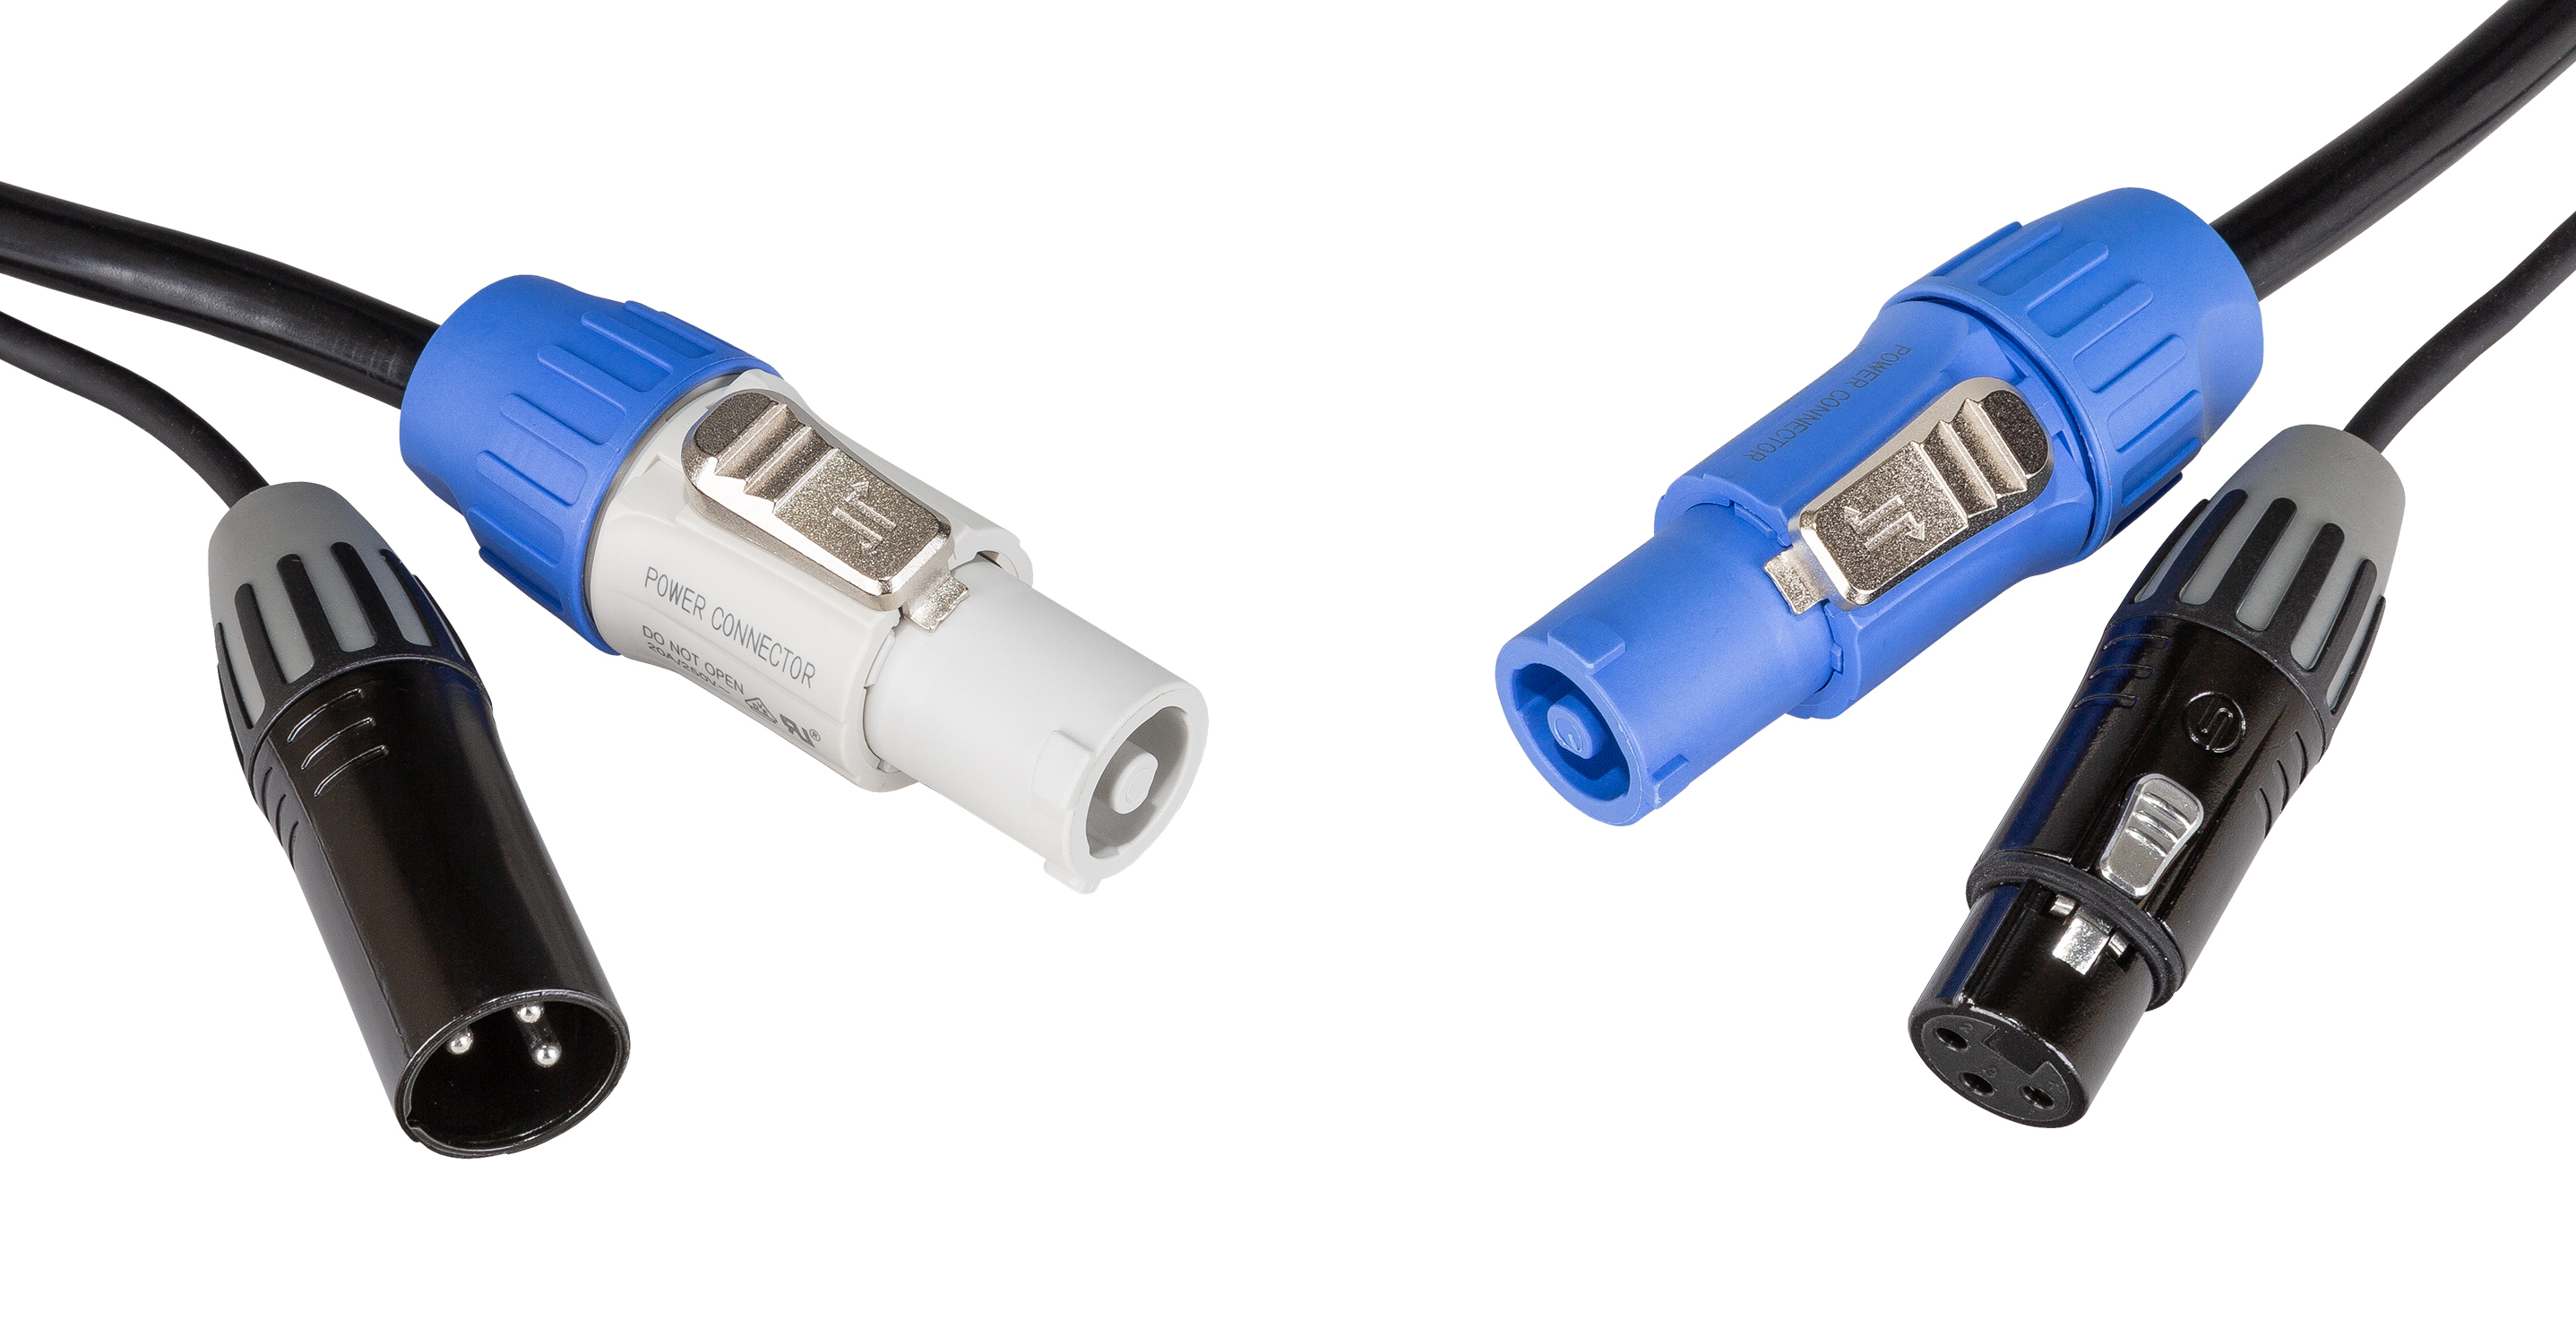 Combi cable with Seetronic XLR 3pin and Powercon compatible connectors - length 1.5m